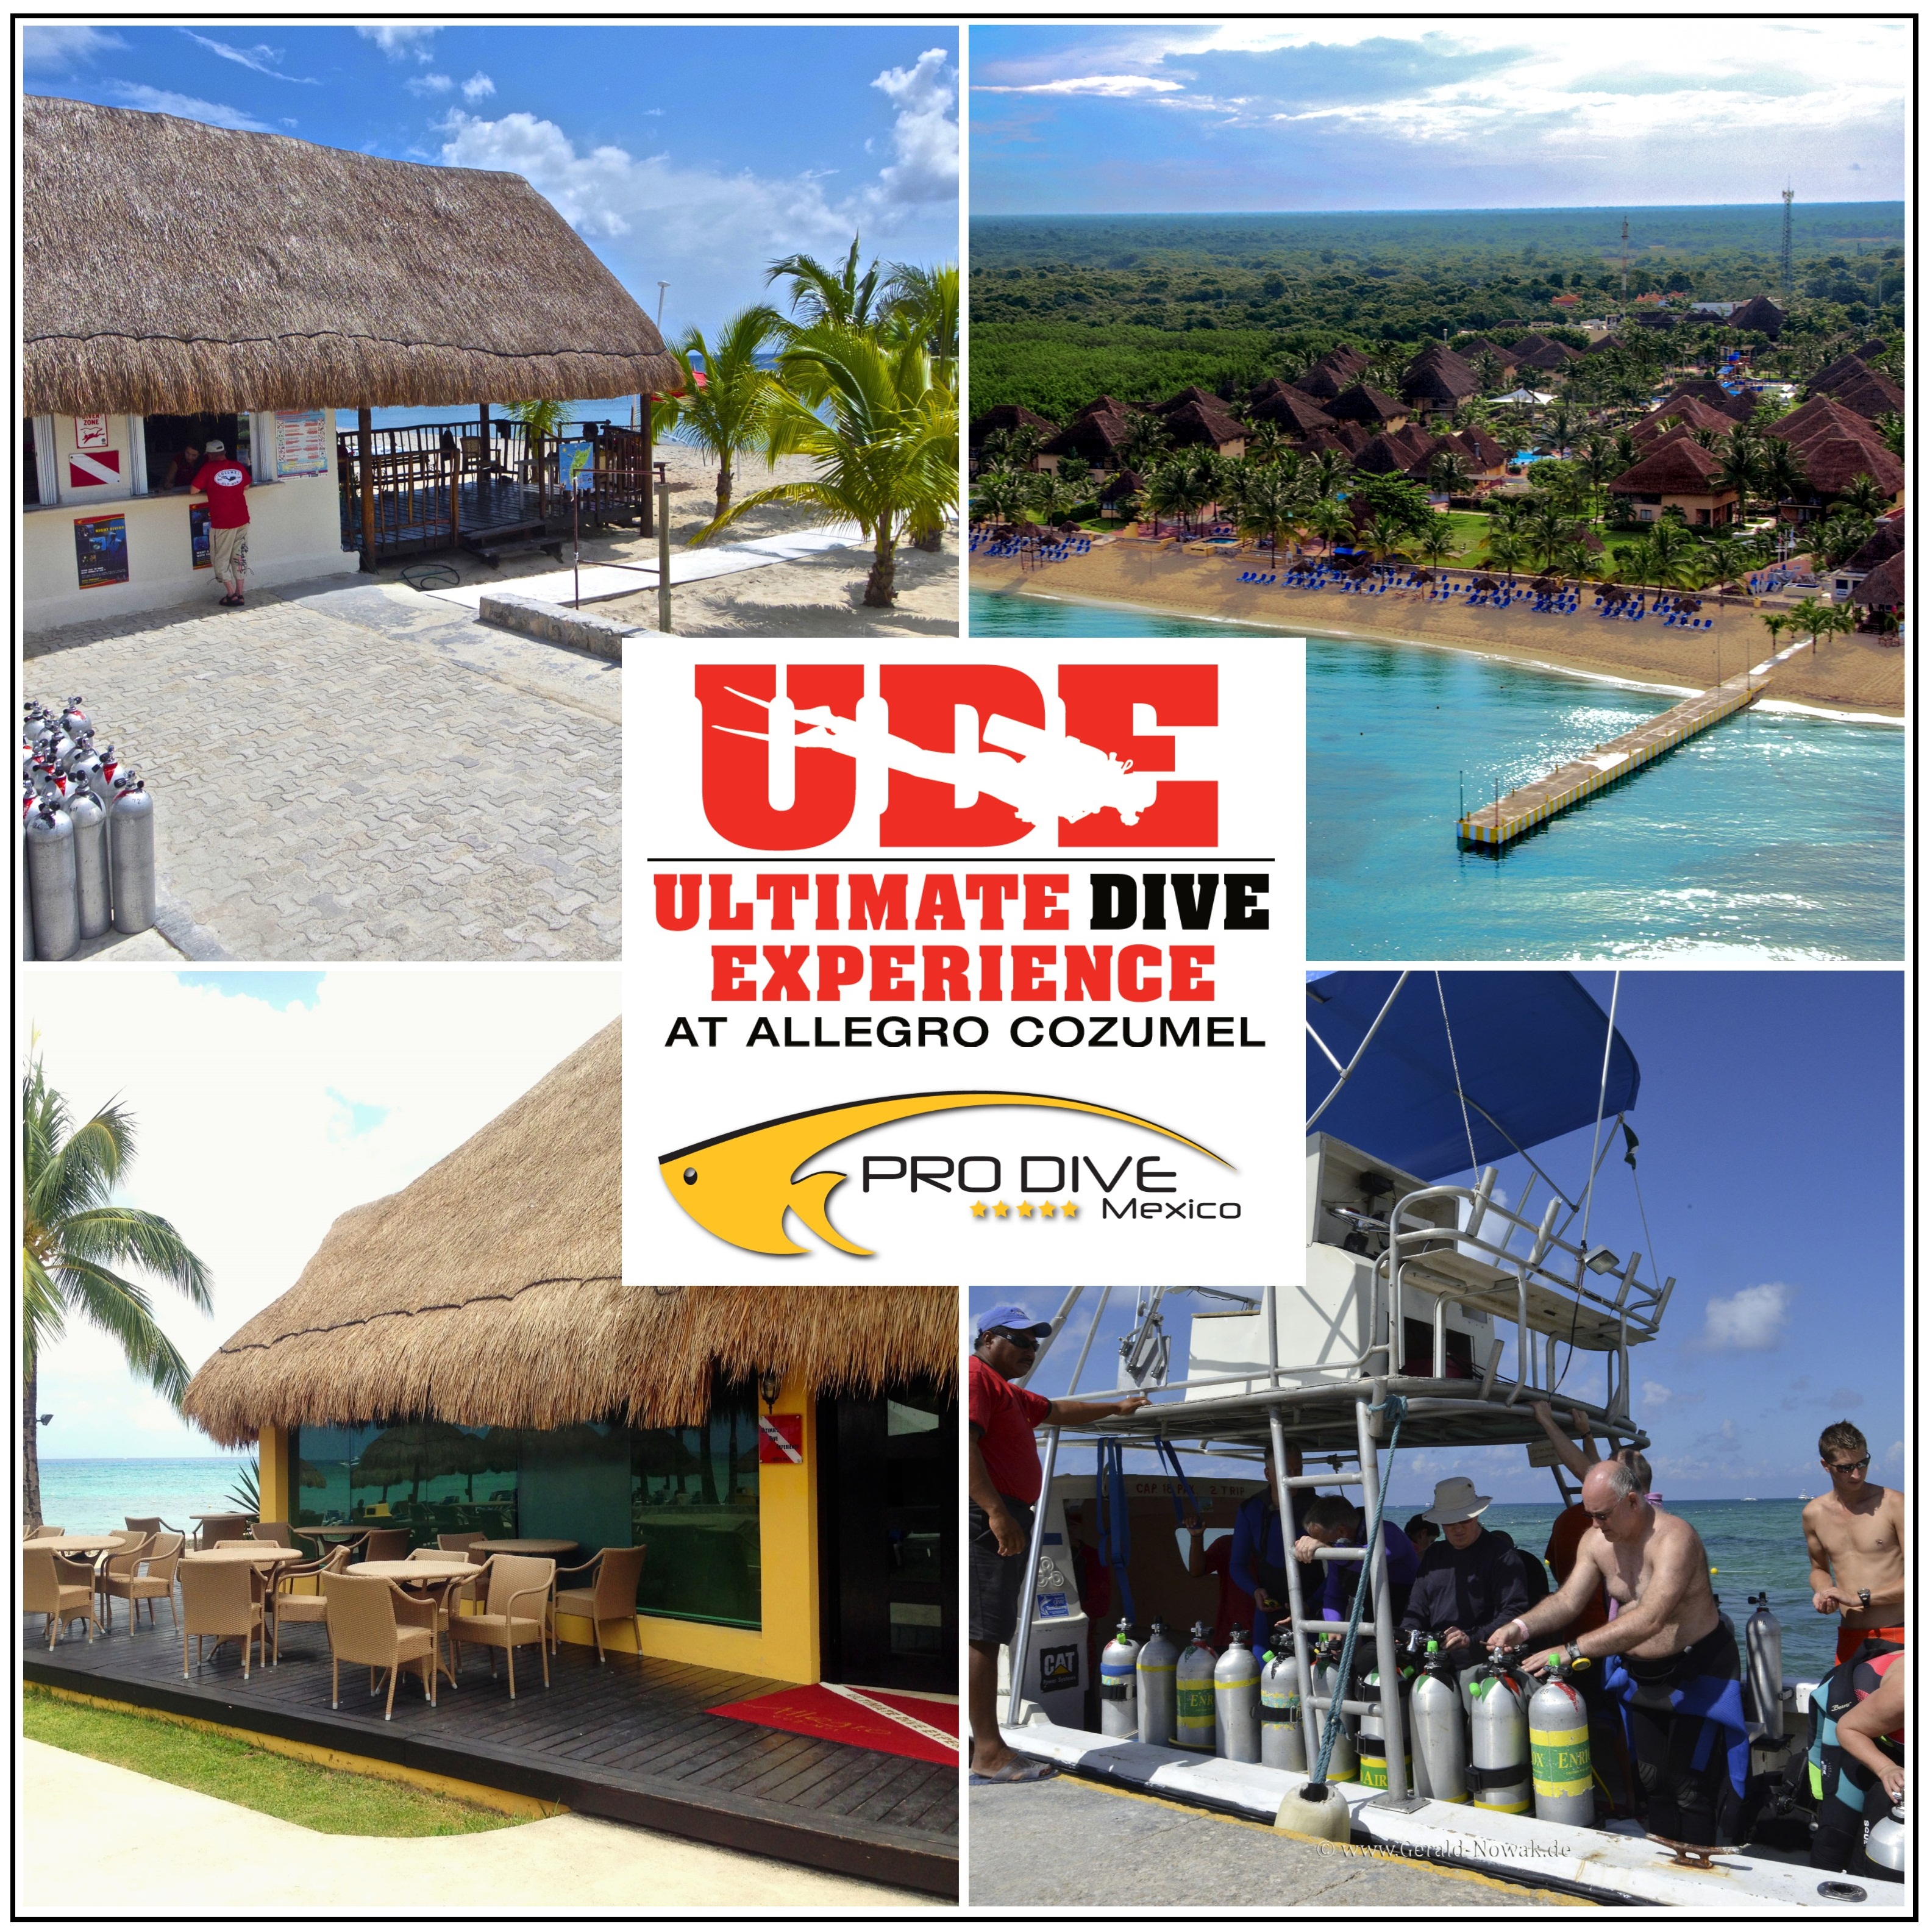 VIP Dive Concept “Ultimate Dive Experience” at Allegro Cozumel with Pro  Dive Mexico - The Scuba News